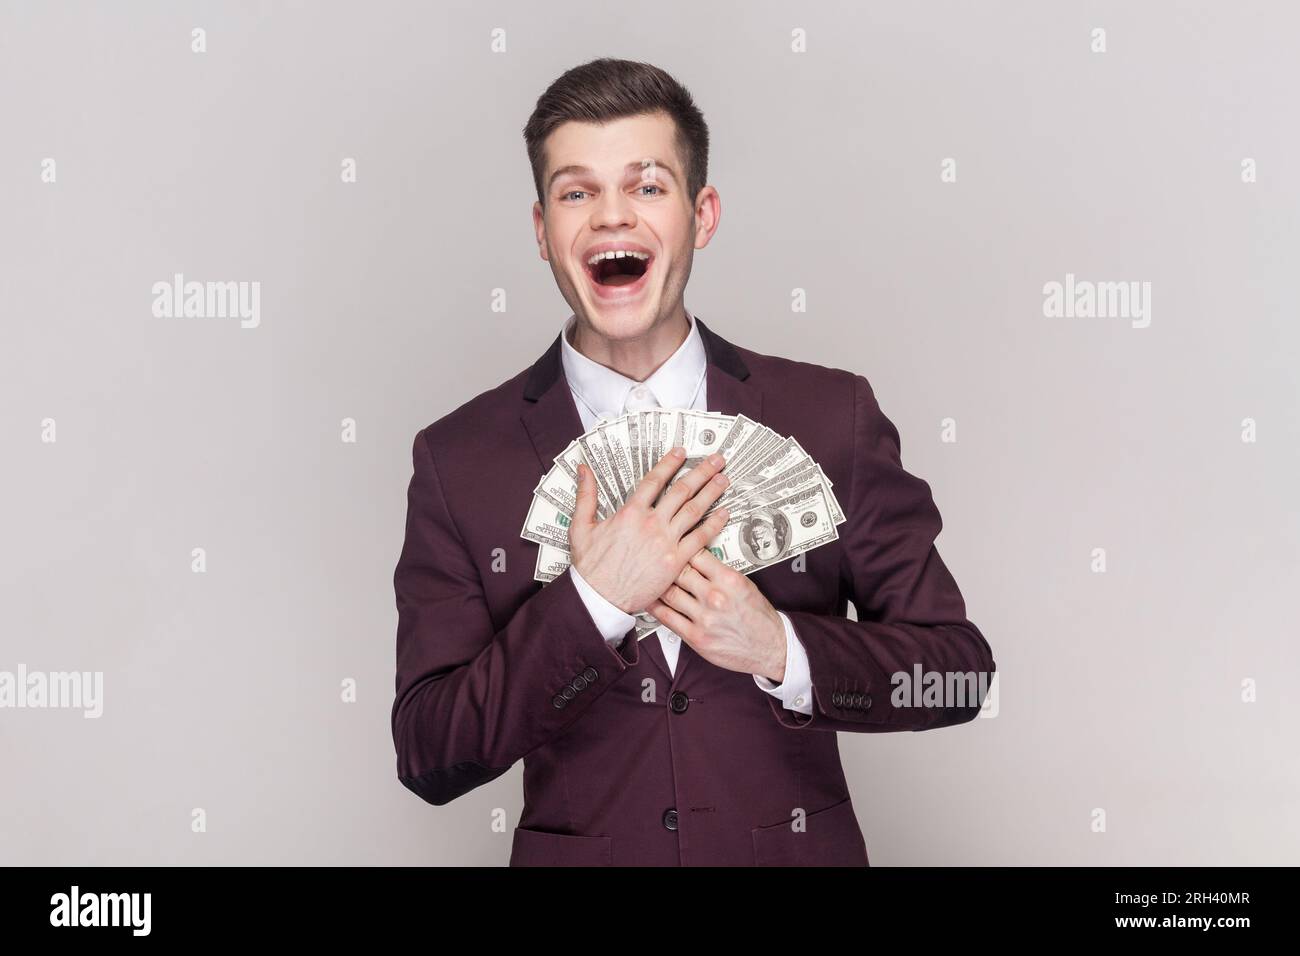 Portrait of extremely happy joyful handsome young man holding money, embracing dollar banknotes, smiling happily, wearing violet suit and white shirt. Indoor studio shot isolated on grey background. Stock Photo